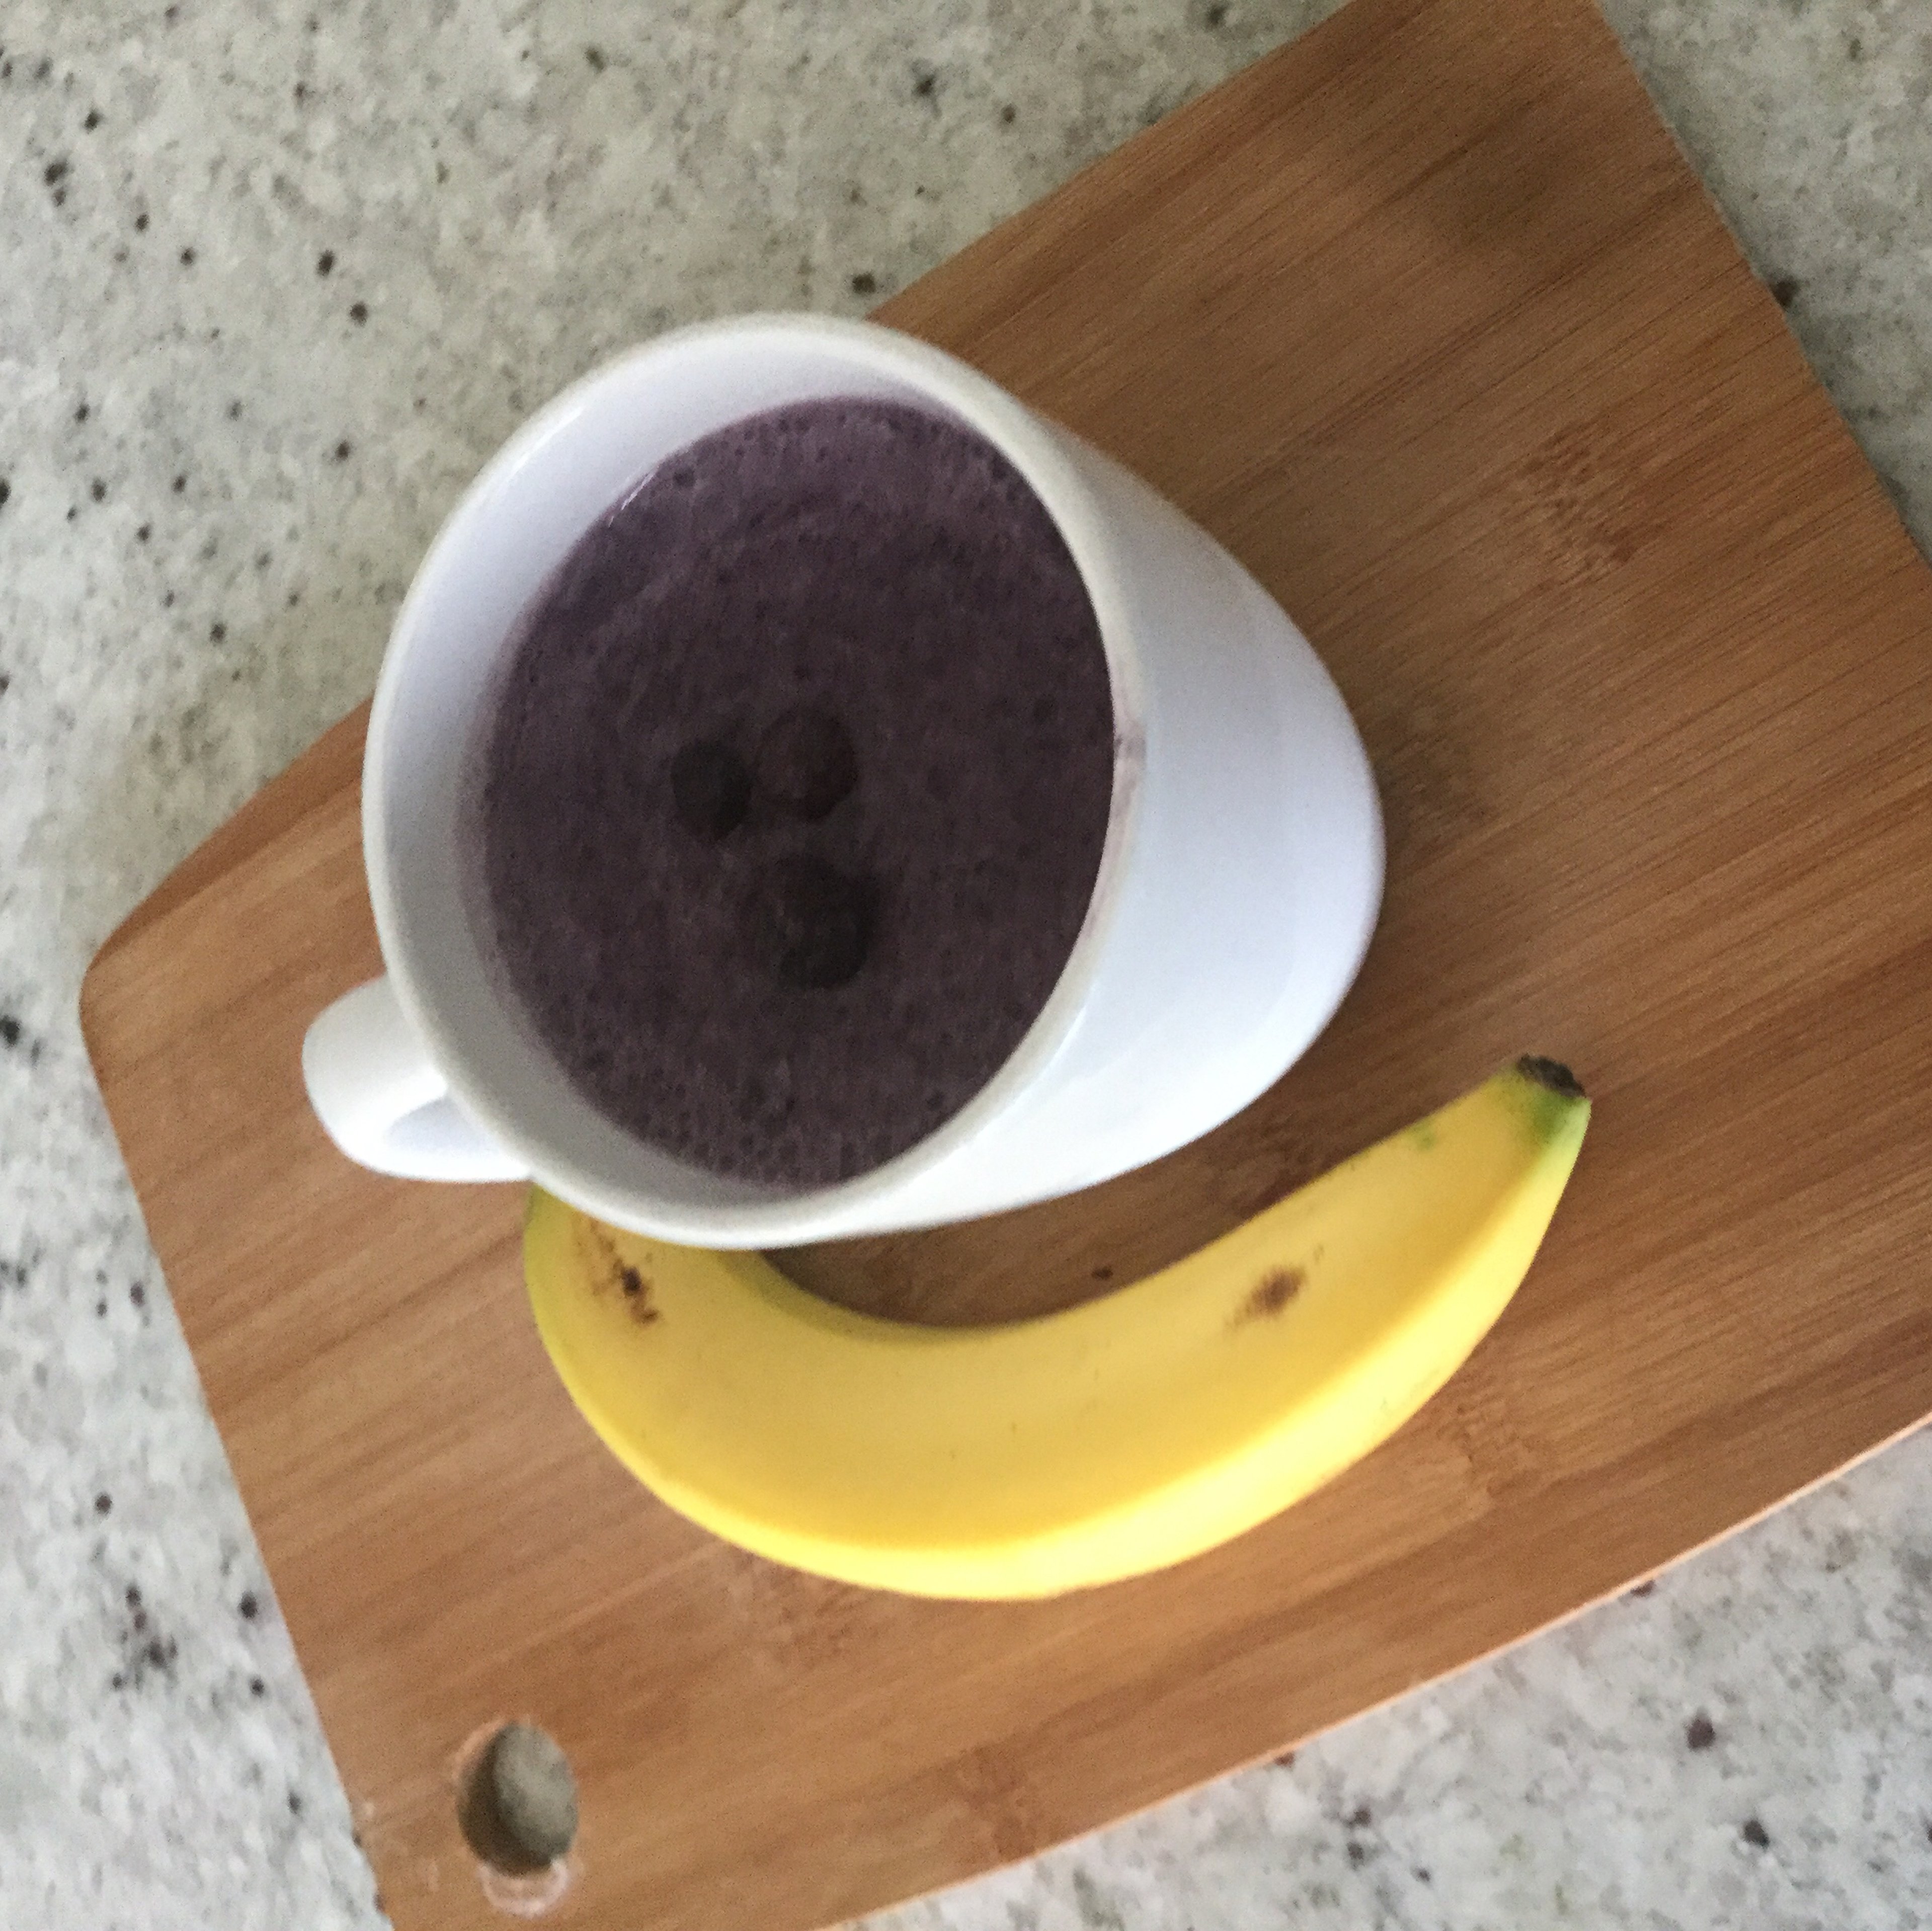 Blueberry and banana smoothie